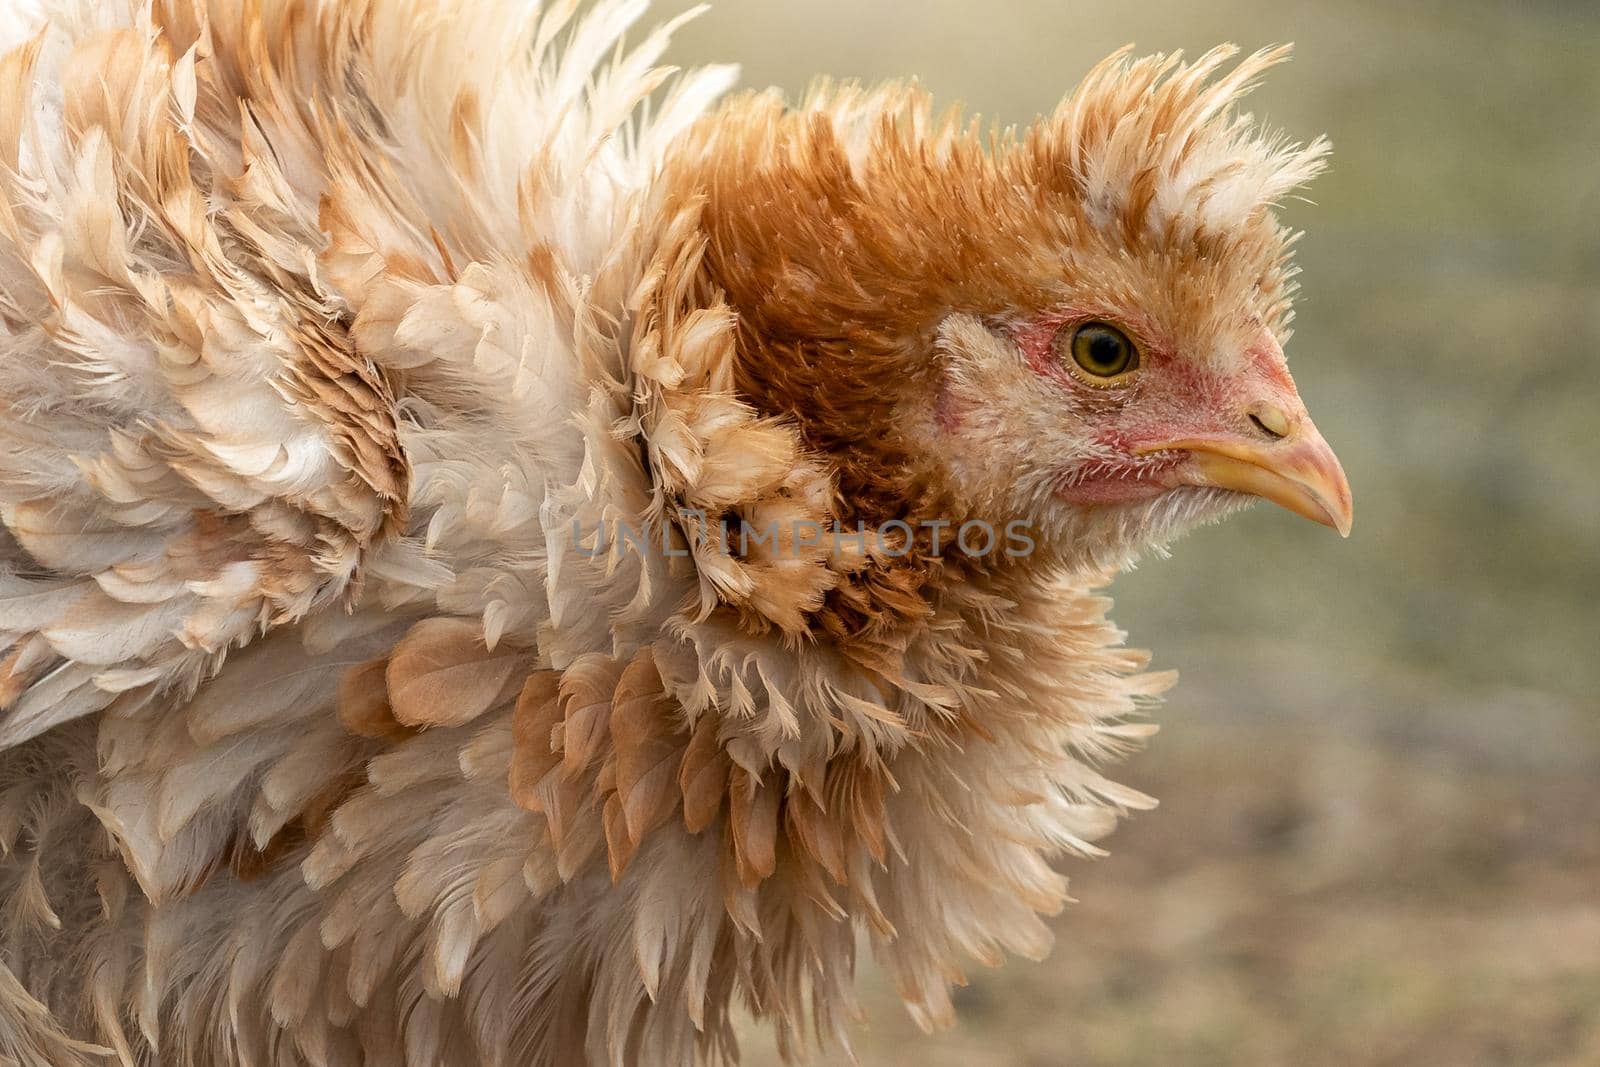 Amazing shaggy light brown hen with tuft. Horizontal photo, close-up profile portrait.